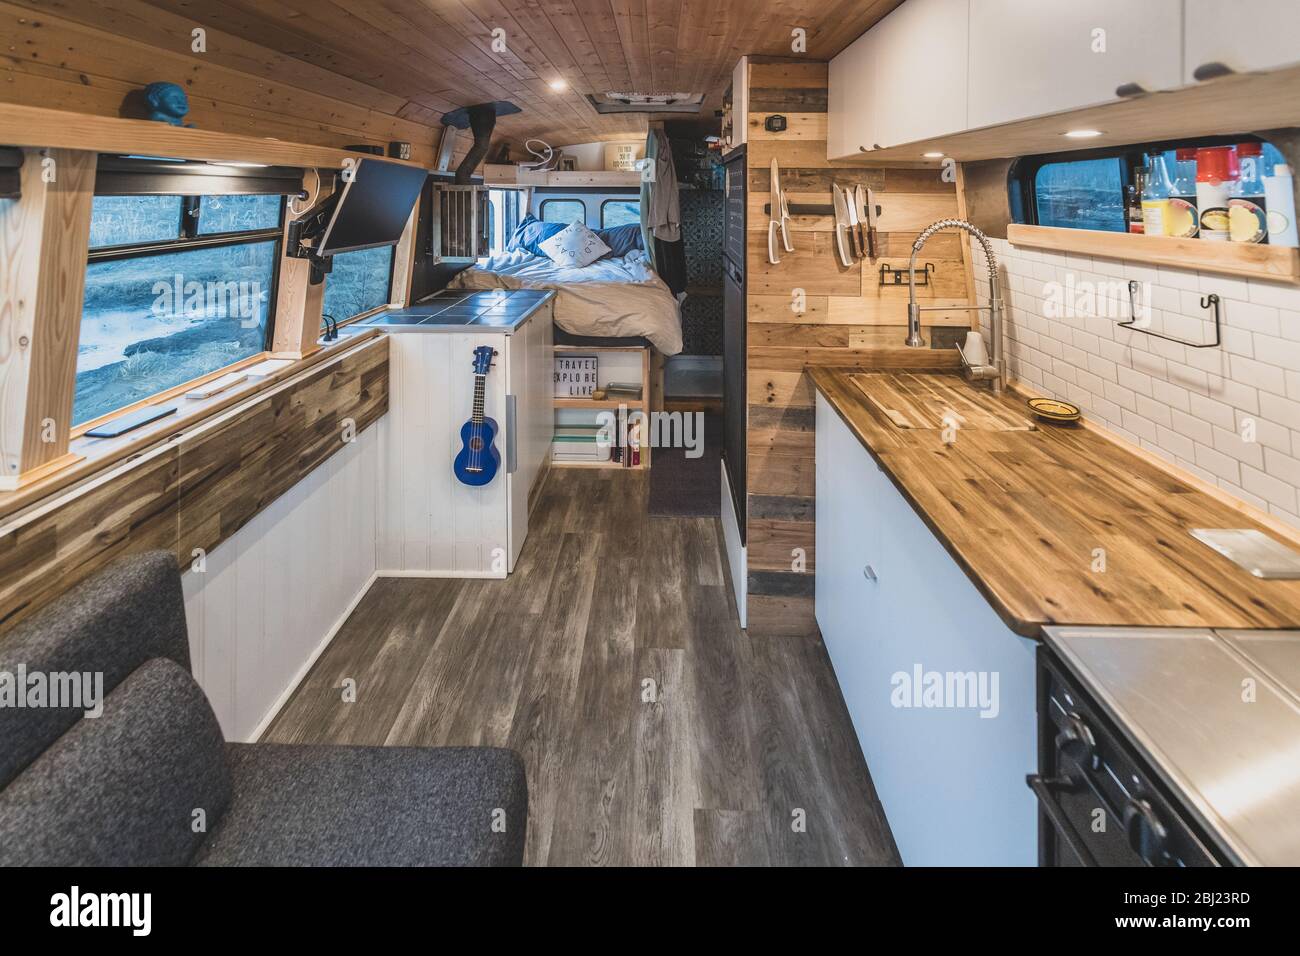 Interior of a campervan with a kitchen area in the foreground and sleeping area in the background. Stock Photo